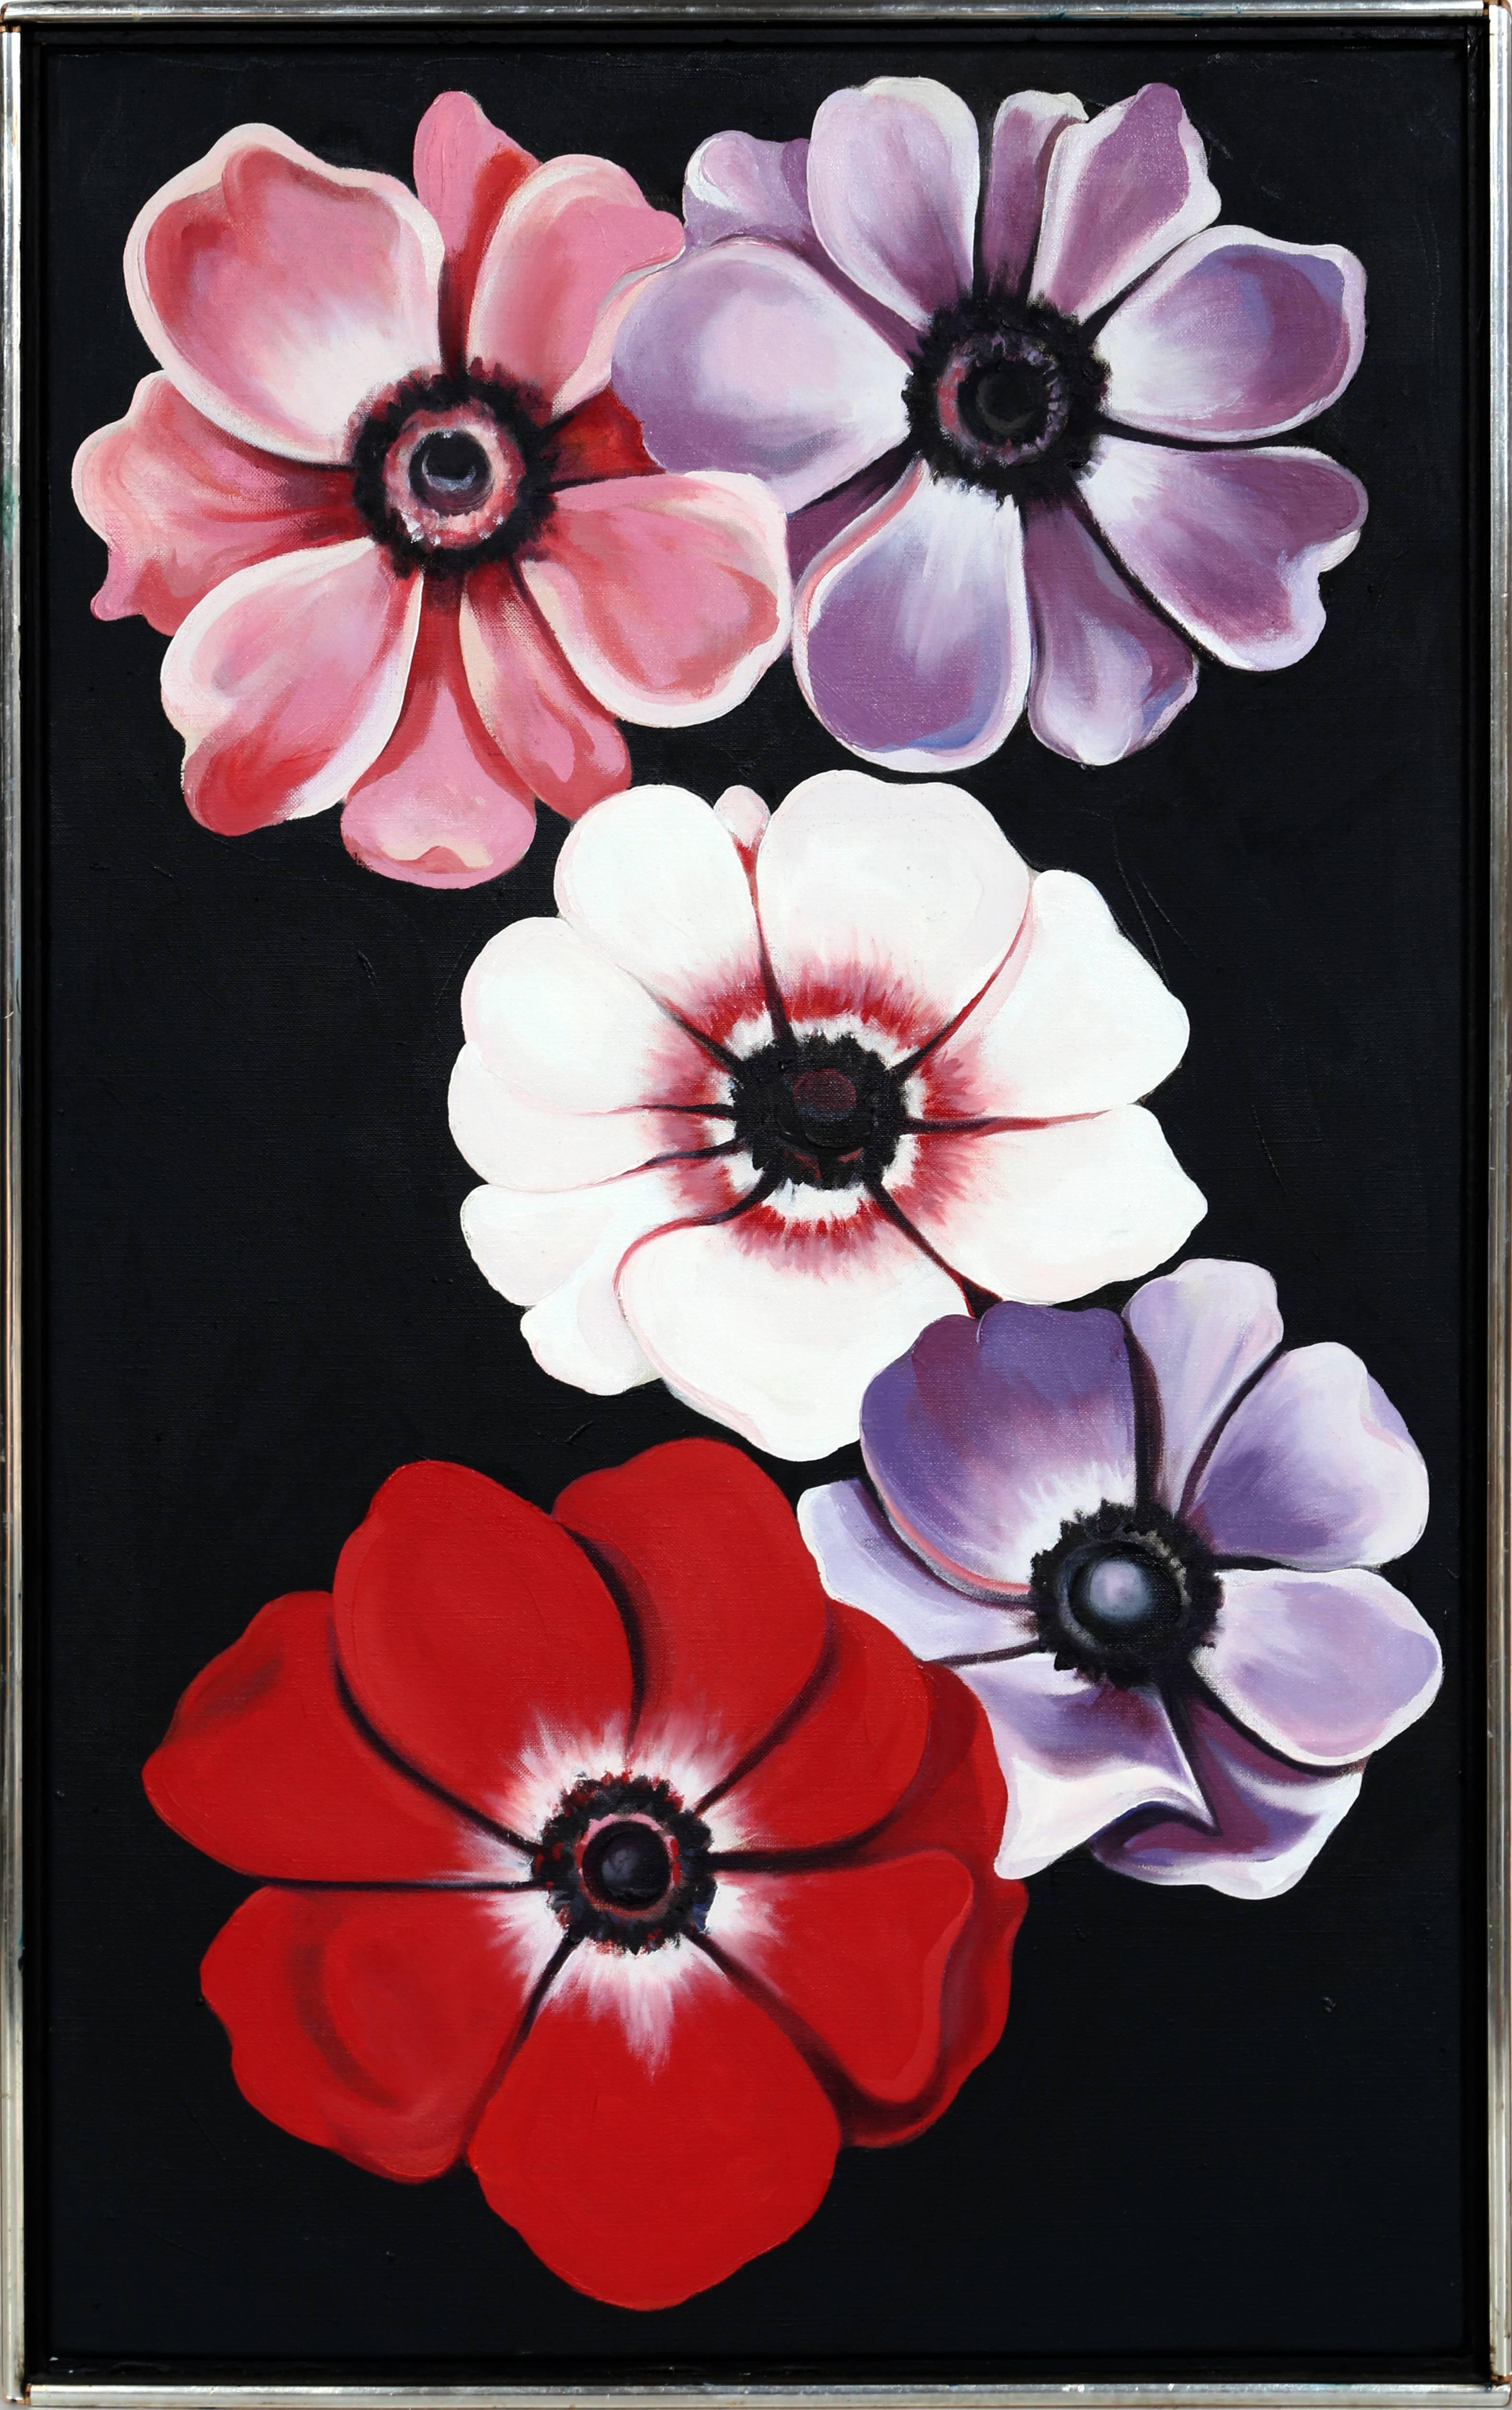 This painting was created by American artist Lowell Blair Nesbitt. His most well known series, and perhaps his most beautiful and poetic, are the more than four hundred works he created using the flower as the theme, which he often depicted in